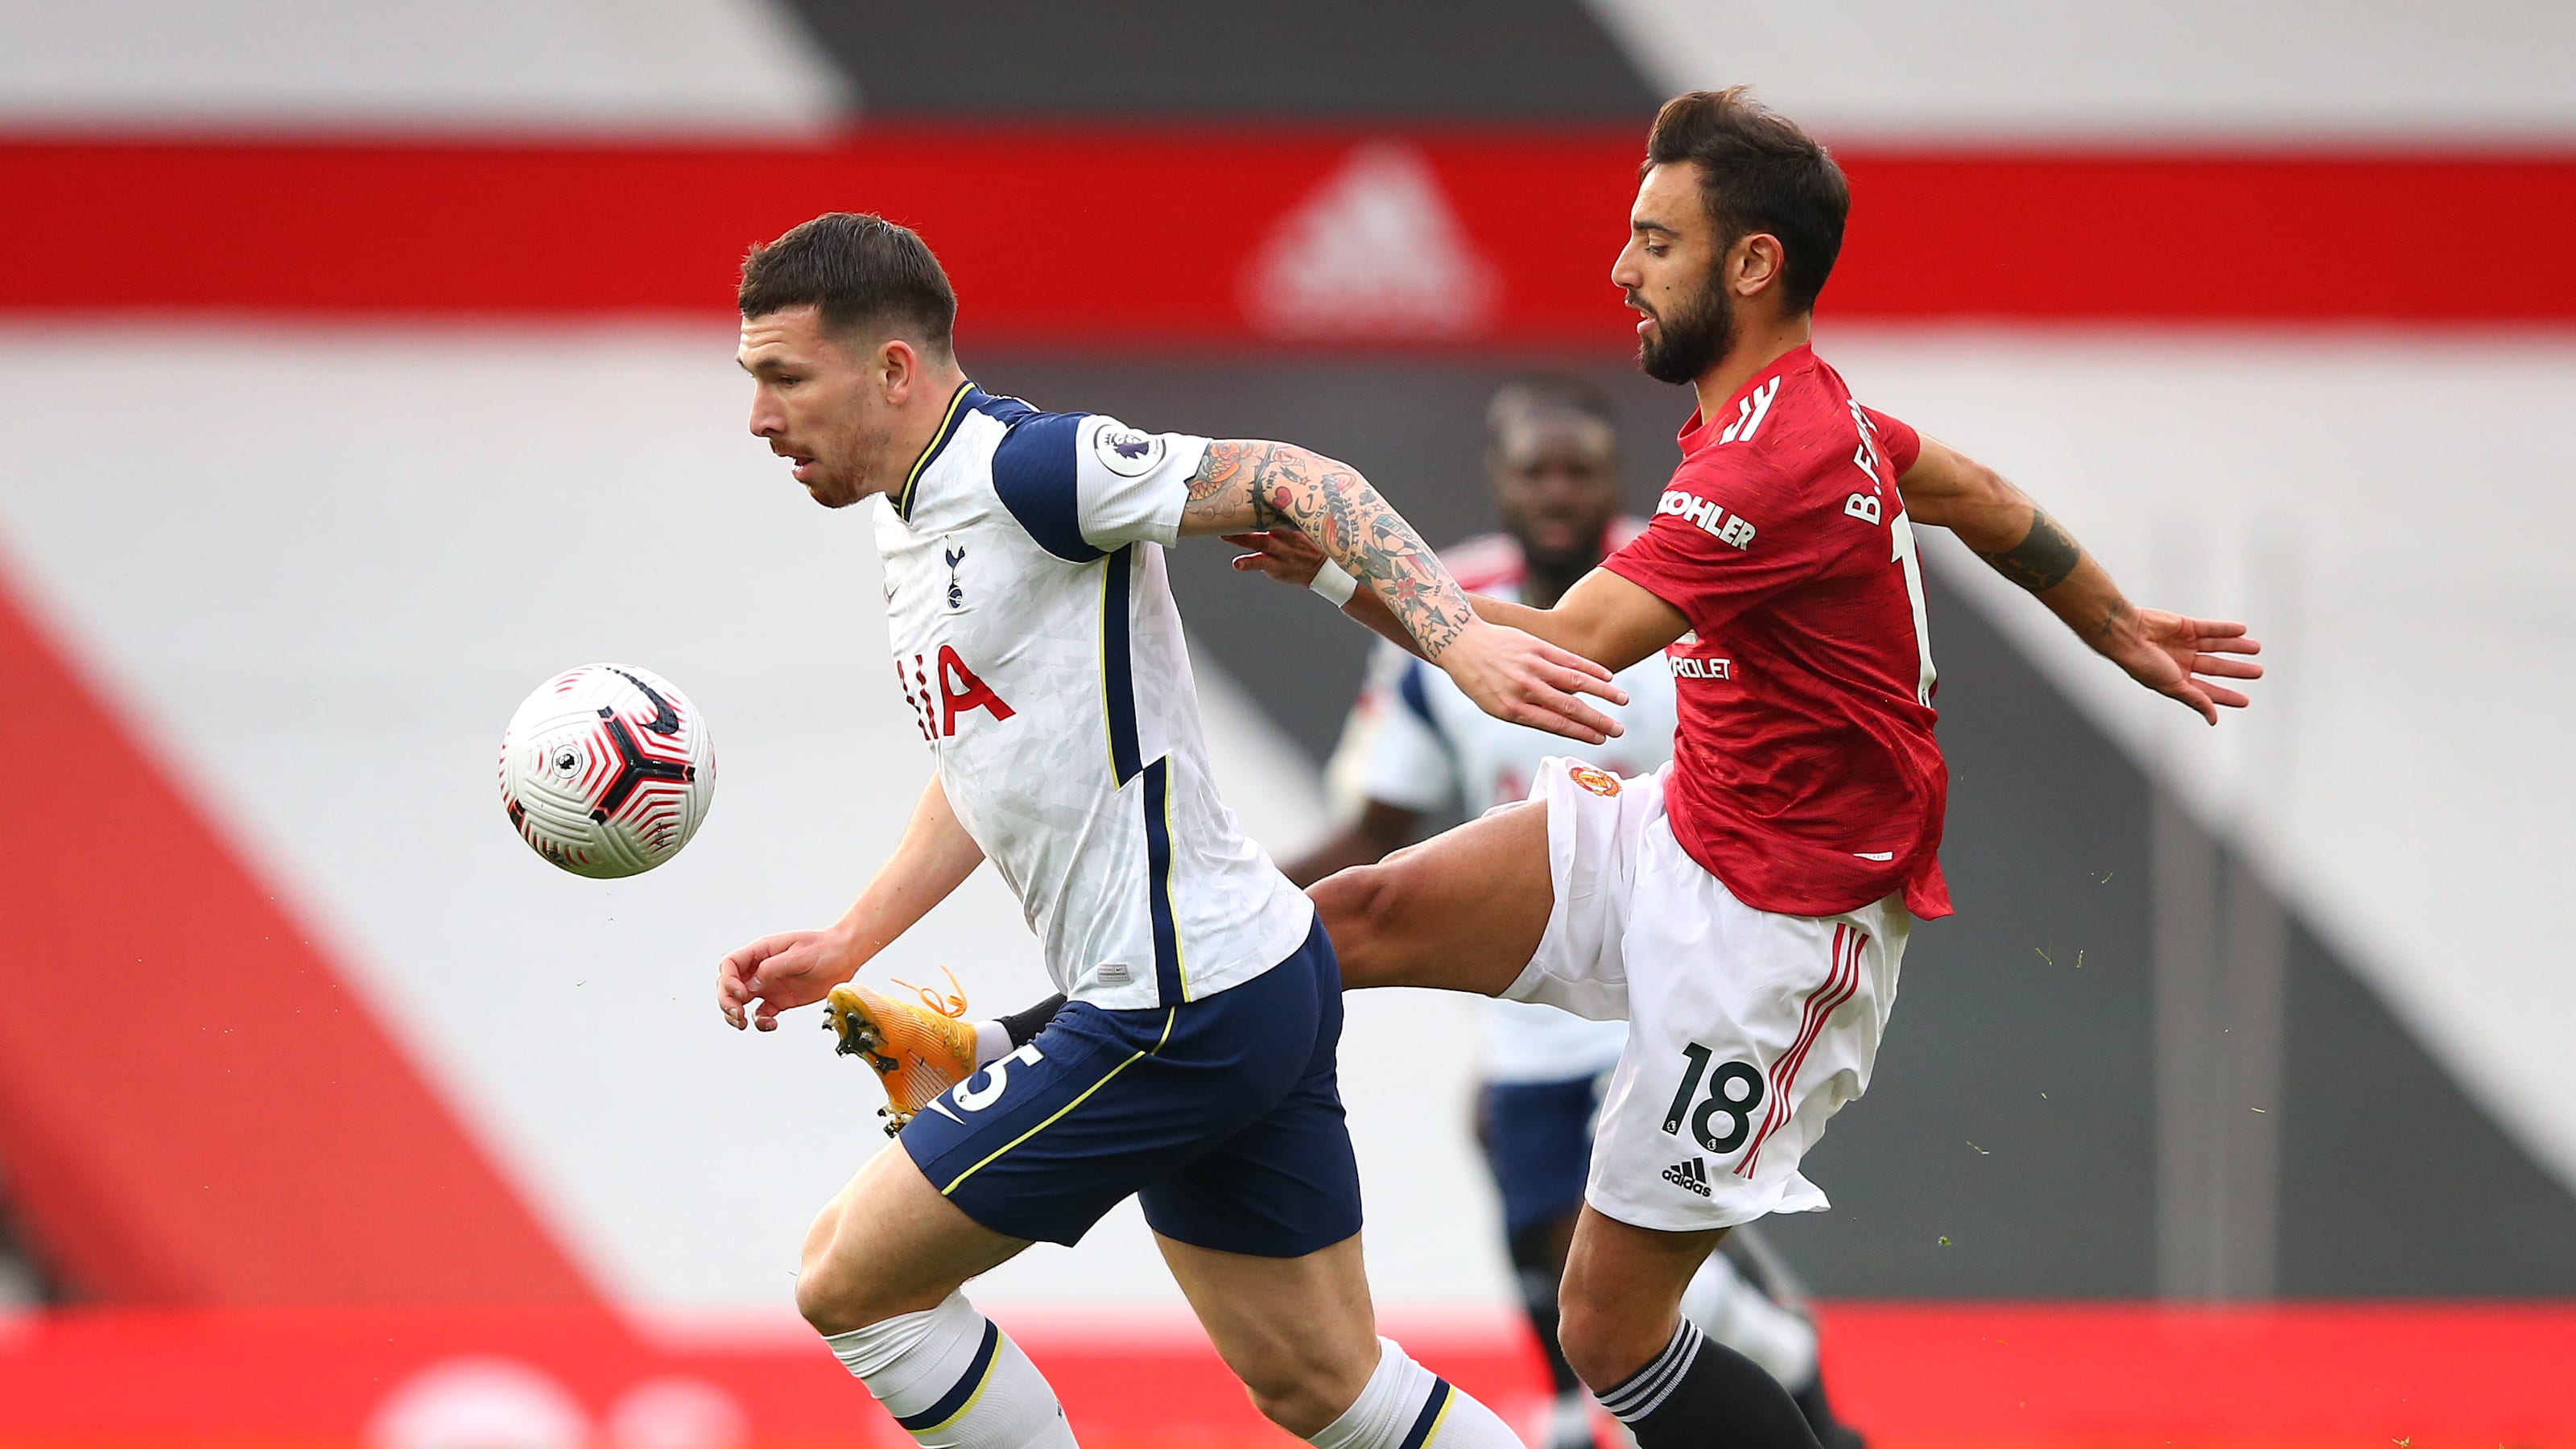 Tottenham Hotspur vs Manchester United Premier League fixtures for matchweek 31: Where to watch live streaming and telecast in India